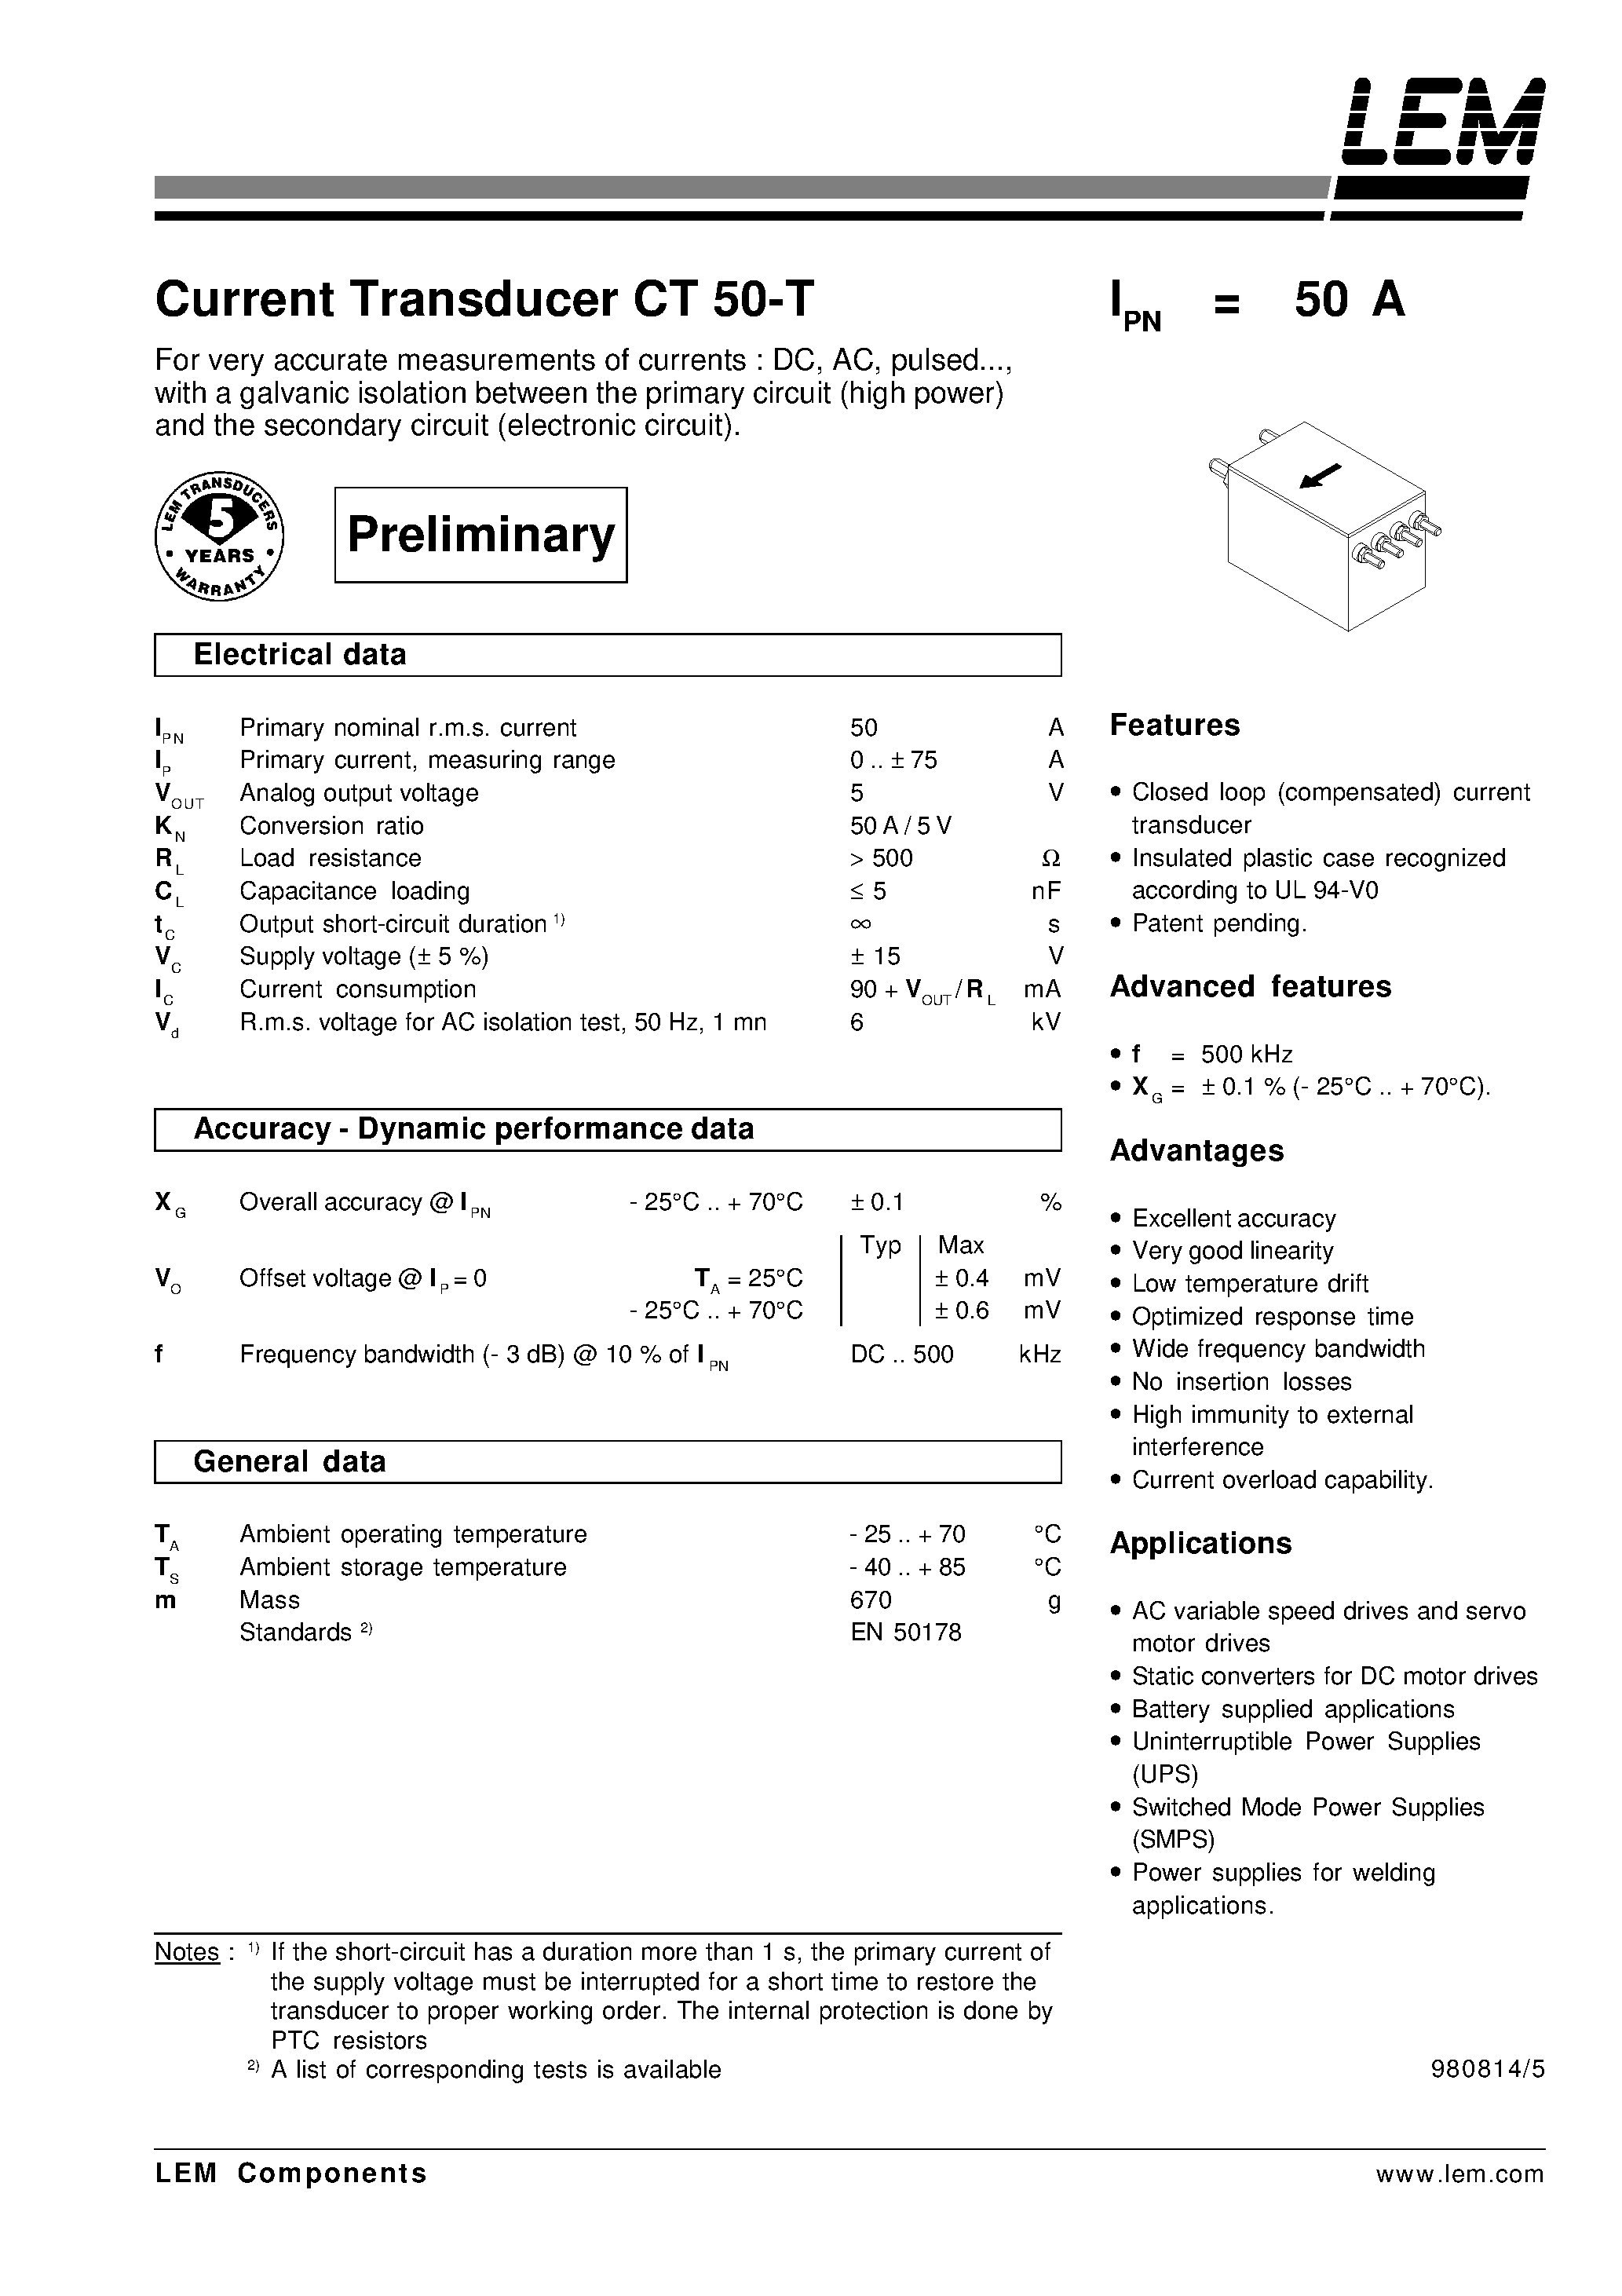 Datasheet CT50-T - Current Transducers CT 50-T page 1